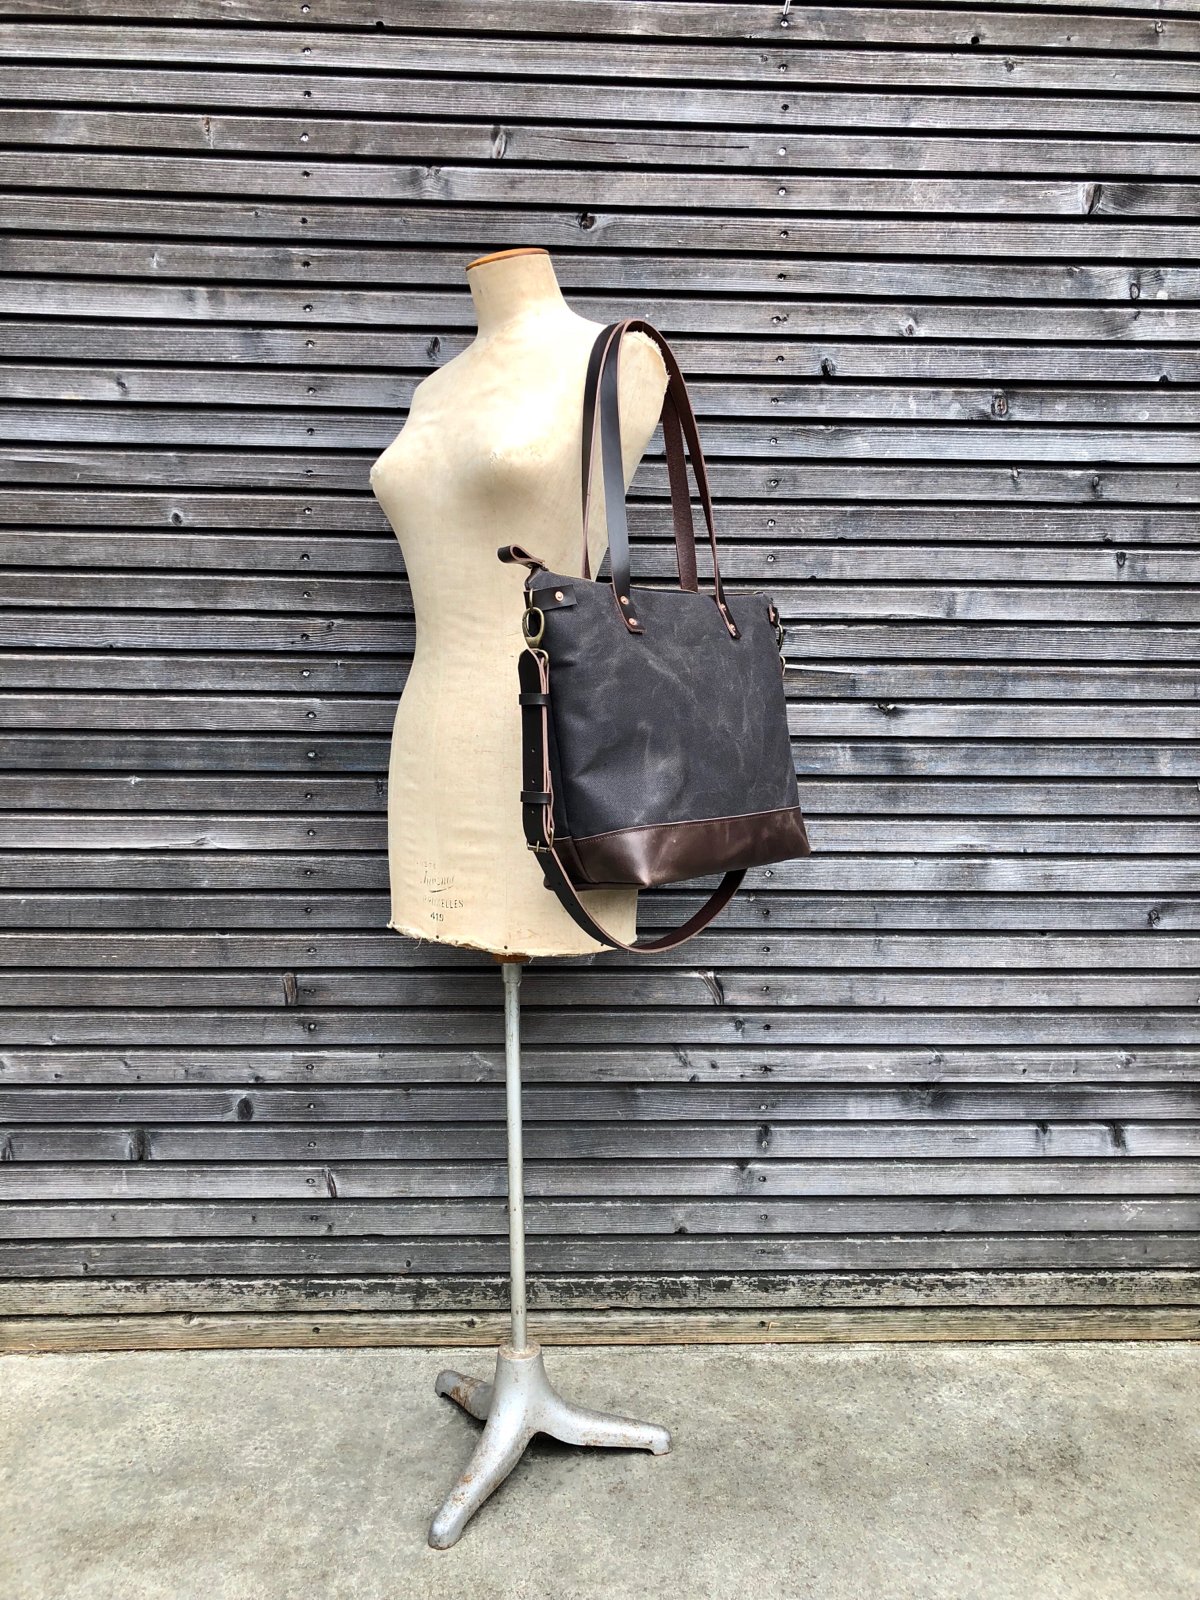 Image of Canvas leather tote bag / carry all / diaper bag with leather handles and leather bottom